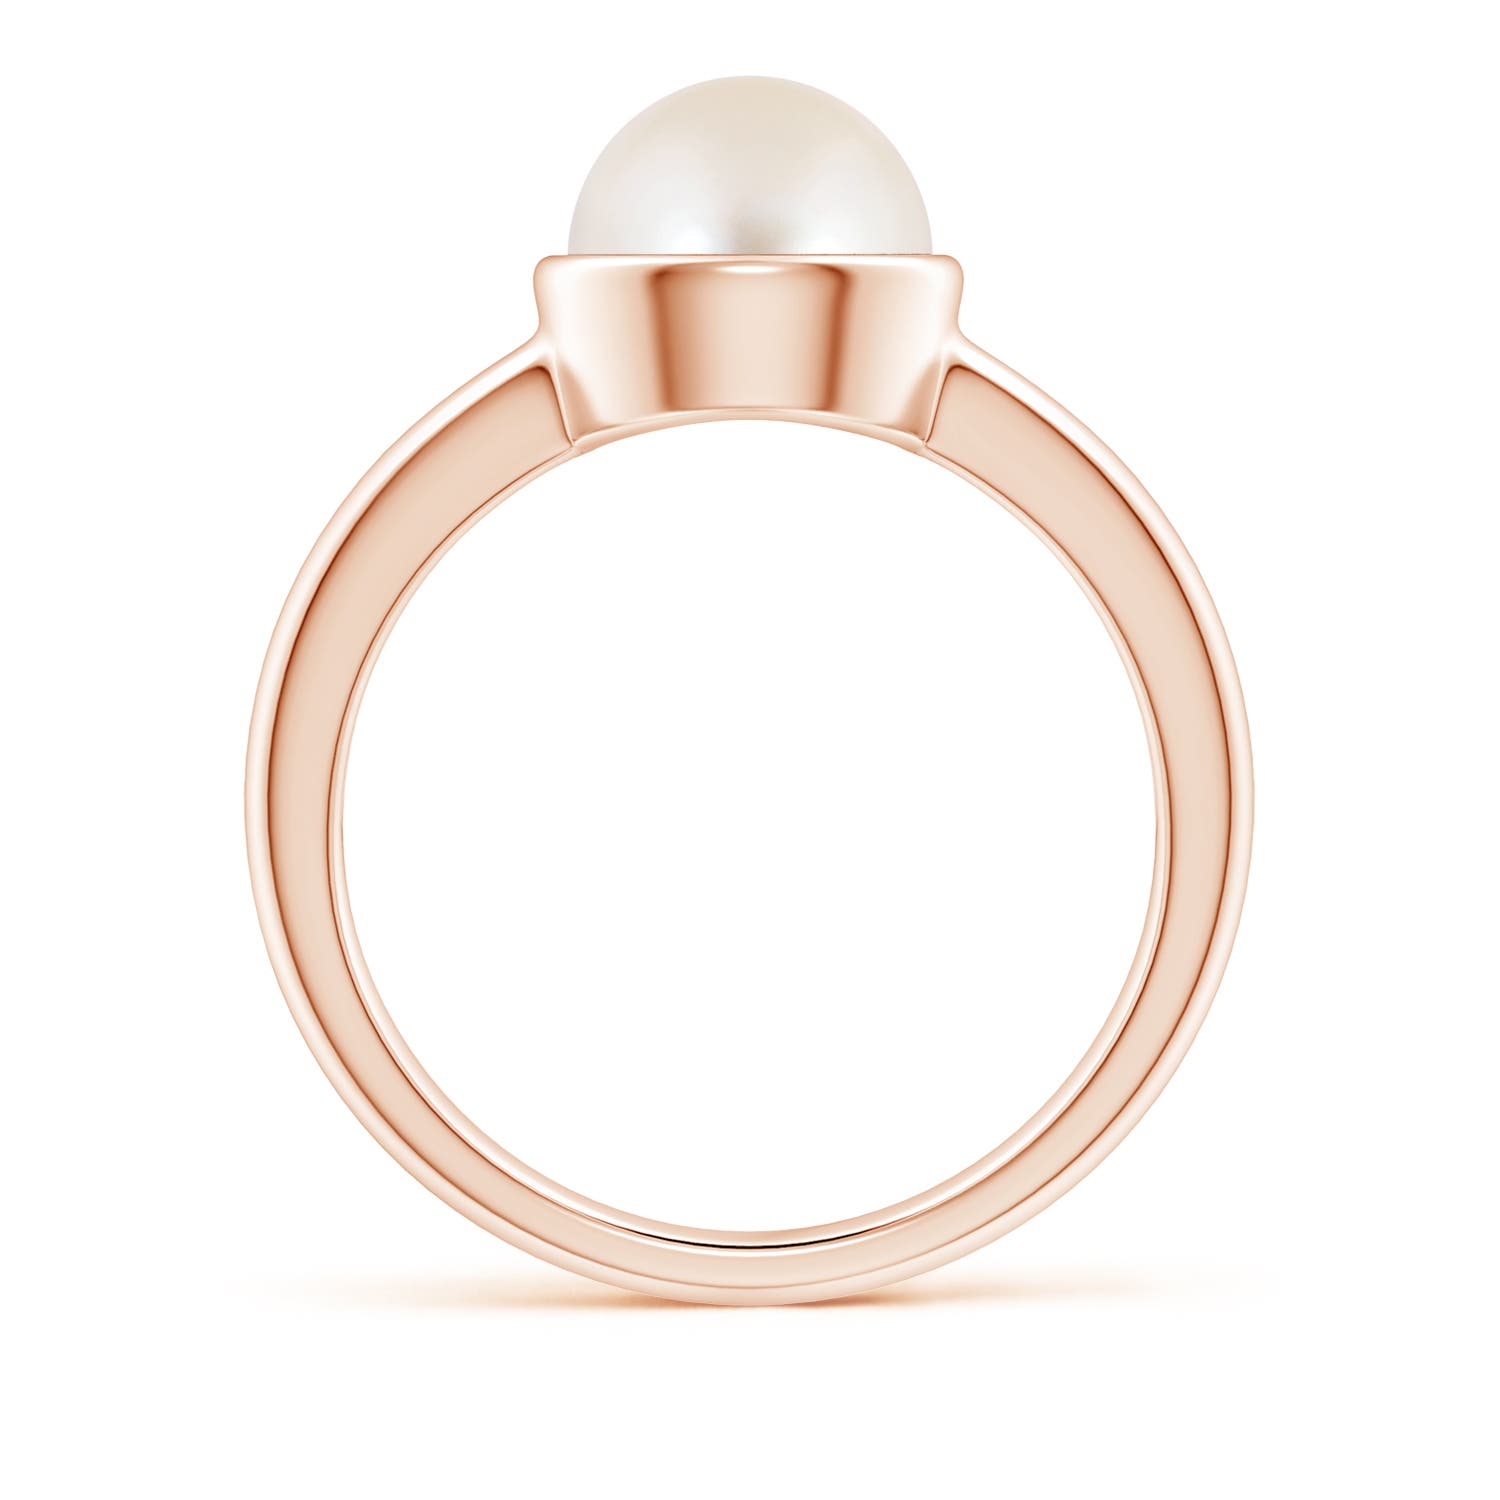 Bezel-Set Round Freshwater Pearl Solitaire Engagement Ring